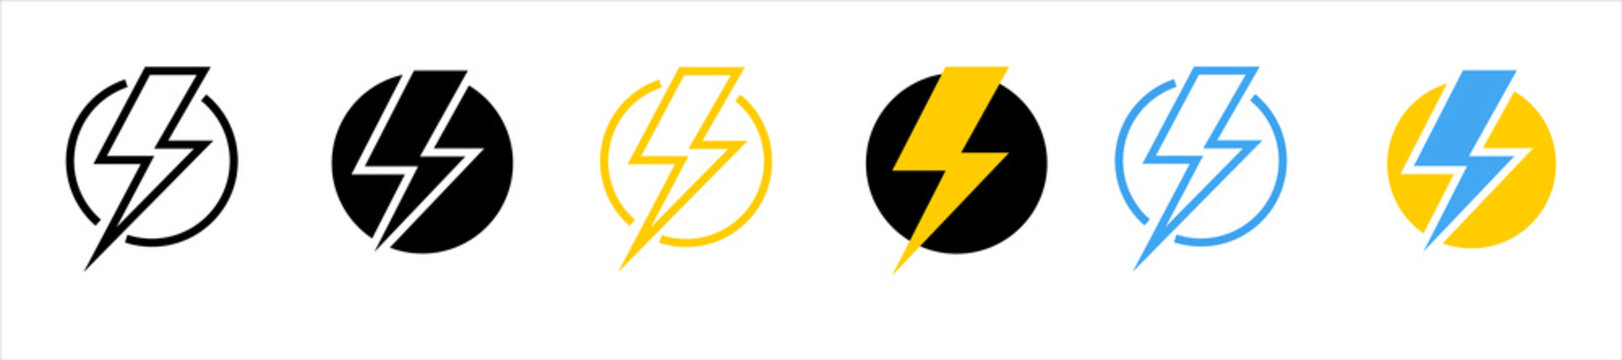 Electric vector icons, isolated. Bolt lightning flash icons. Flash icons collection. Bolt logo. Electric symbols. Electric lightning bolt symbols. Flash light sign. Vector illustration